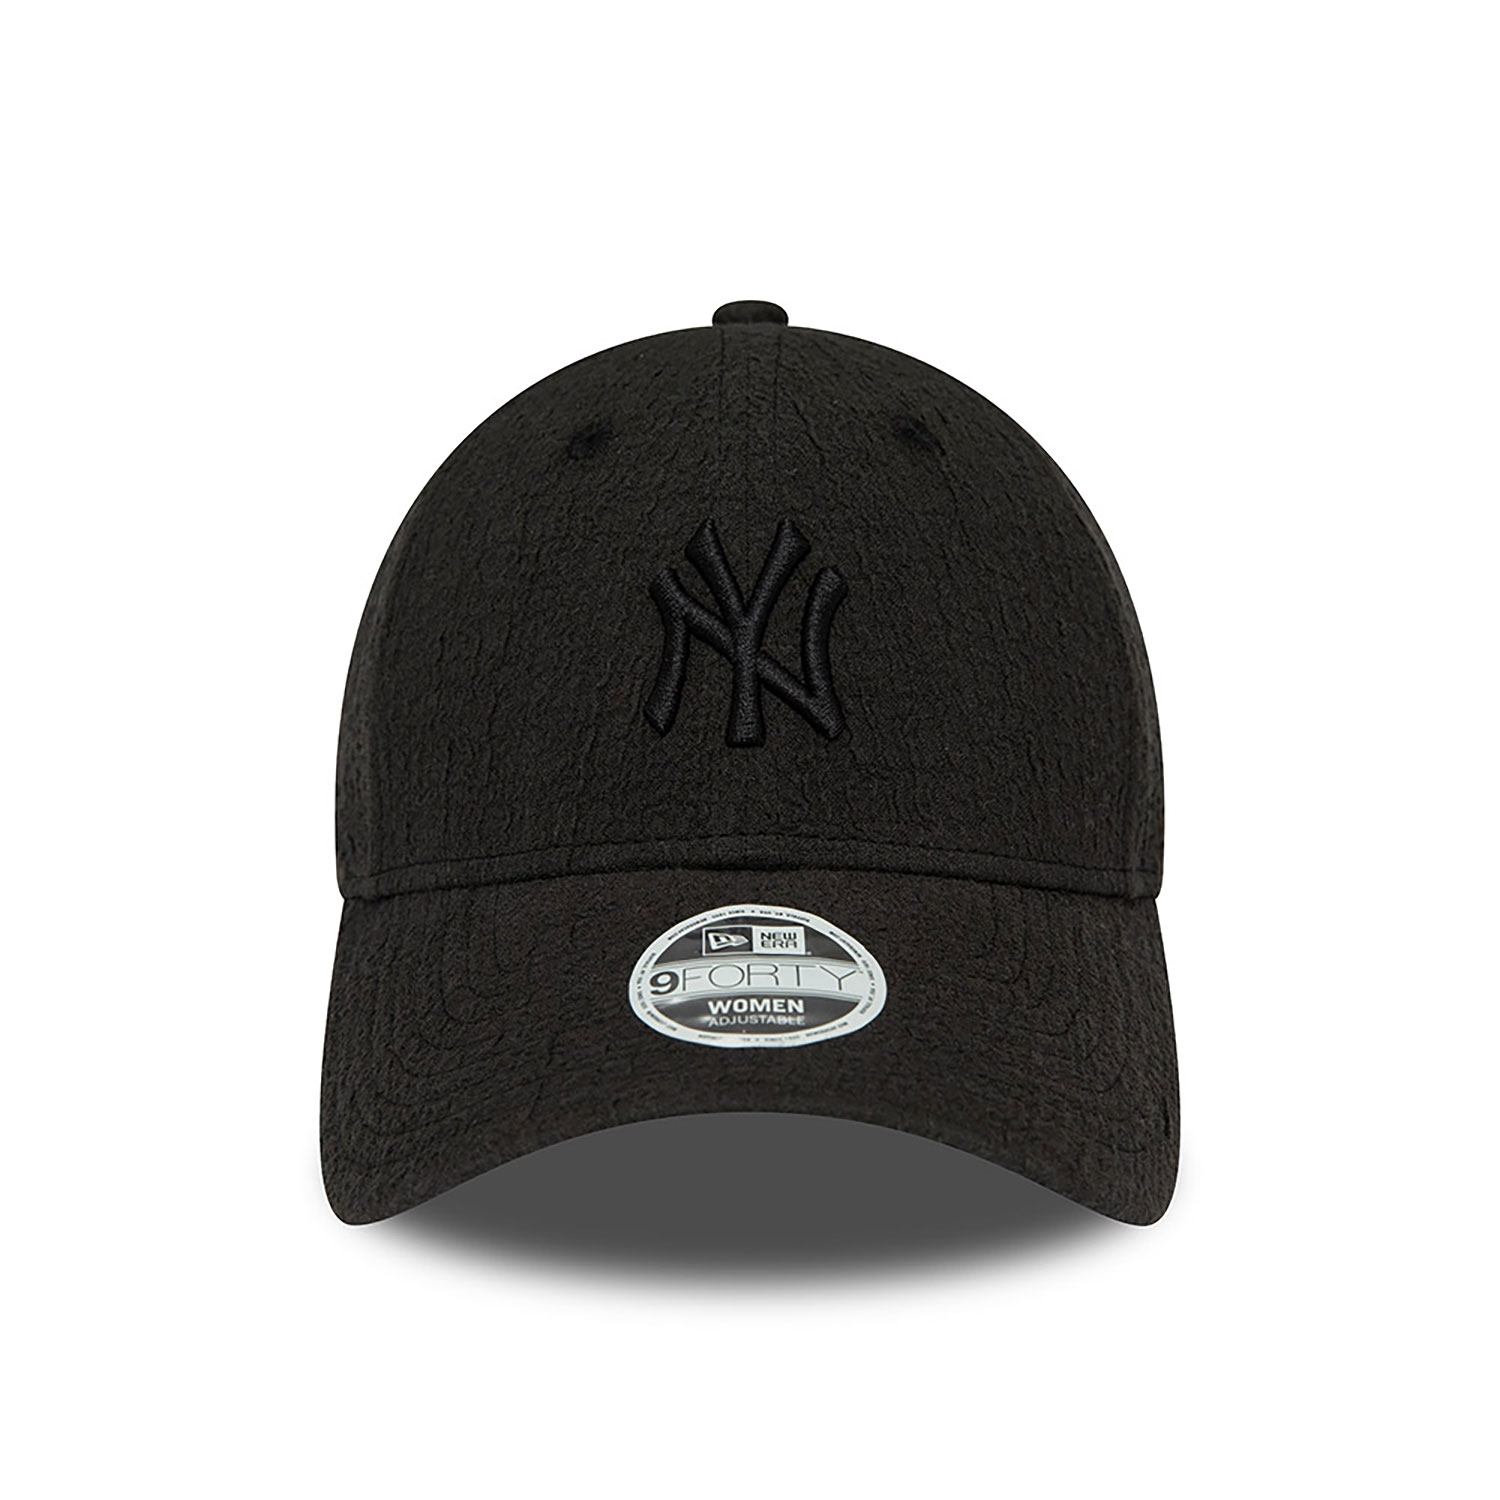 New York Yankees Womens Bubble Stitch Black 9FORTY Adjustable Cap